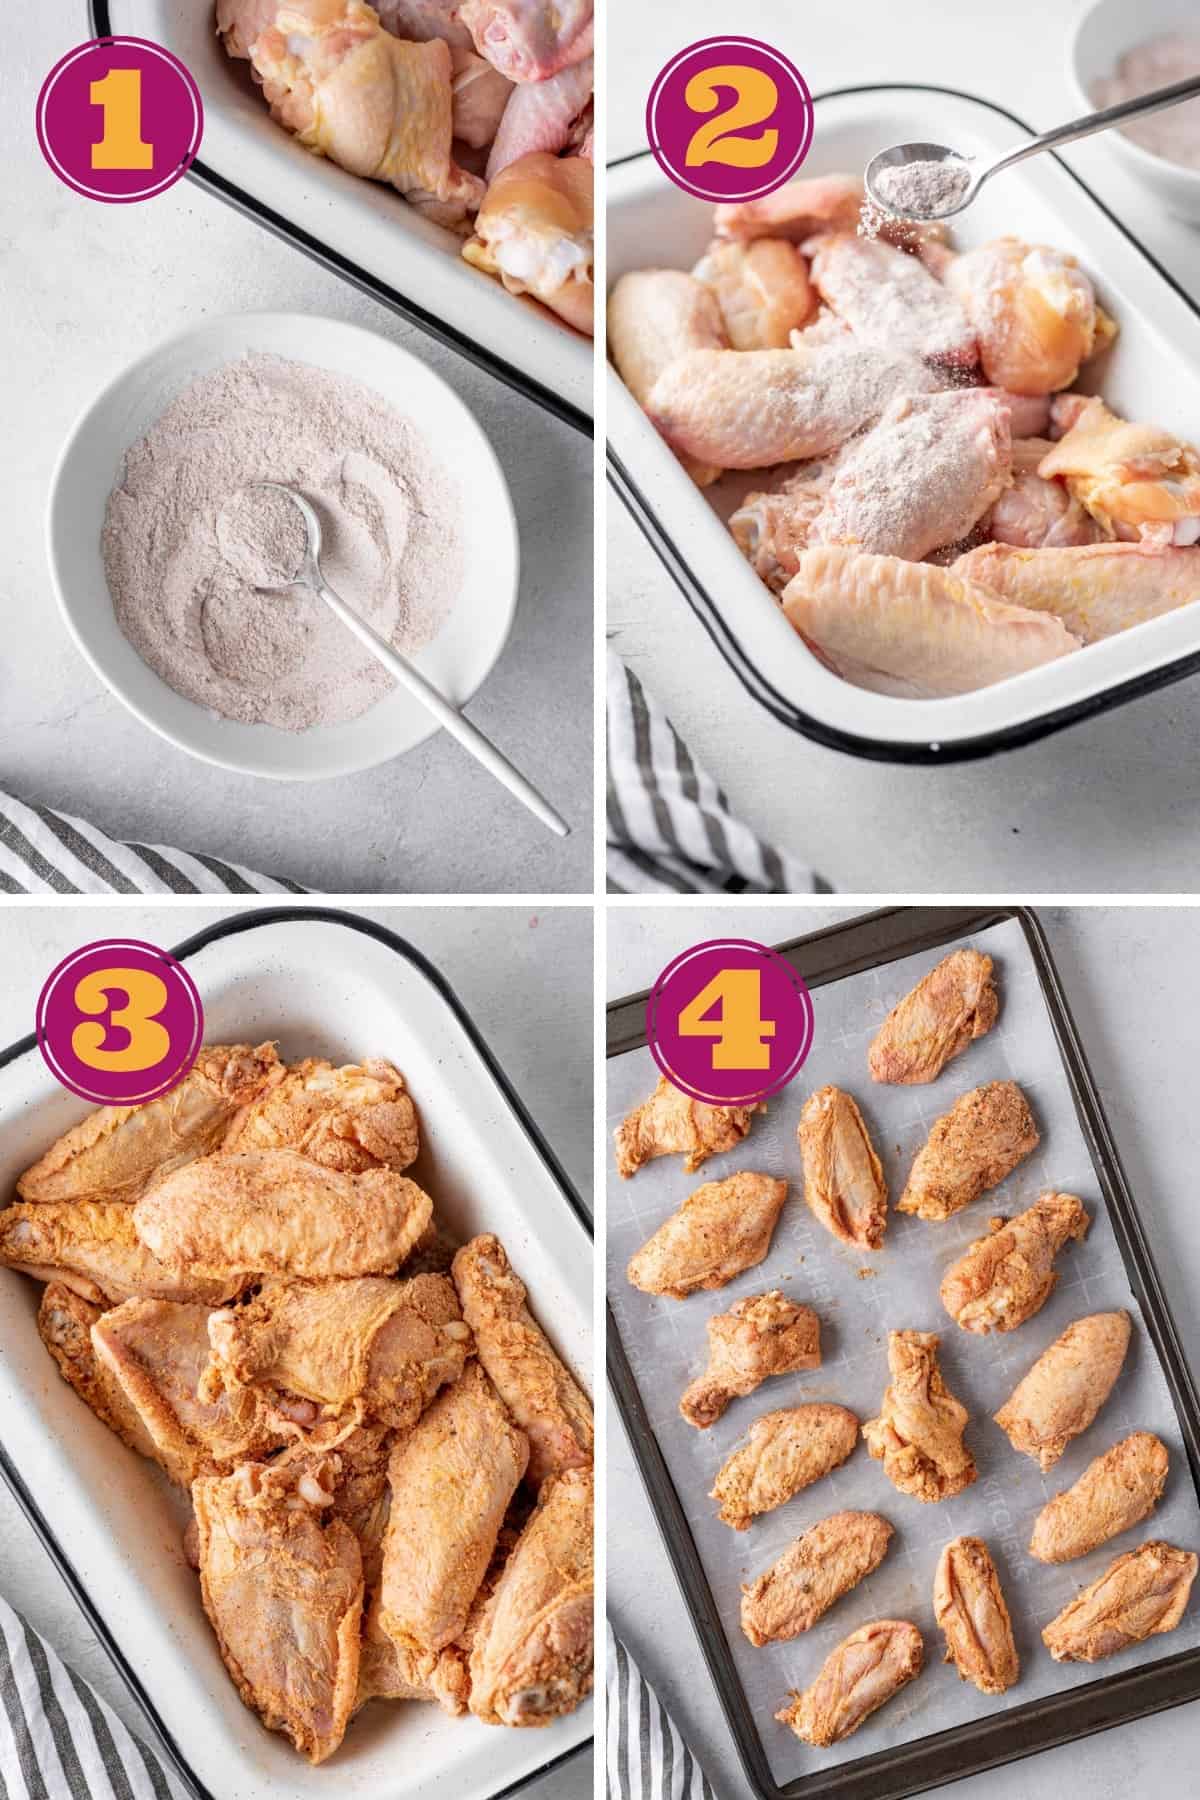 Four numbered pictures: first, a bowl of seasoning with a spoon in it, next to a tray of raw chicken wings; second, a spoon sprinkling seasoning over a dish of raw chicken wings; third a dish full of seasoned, raw chicken wings; and fourth, 15 seasoned, raw chicken wings on a baking sheet with parchment paper.